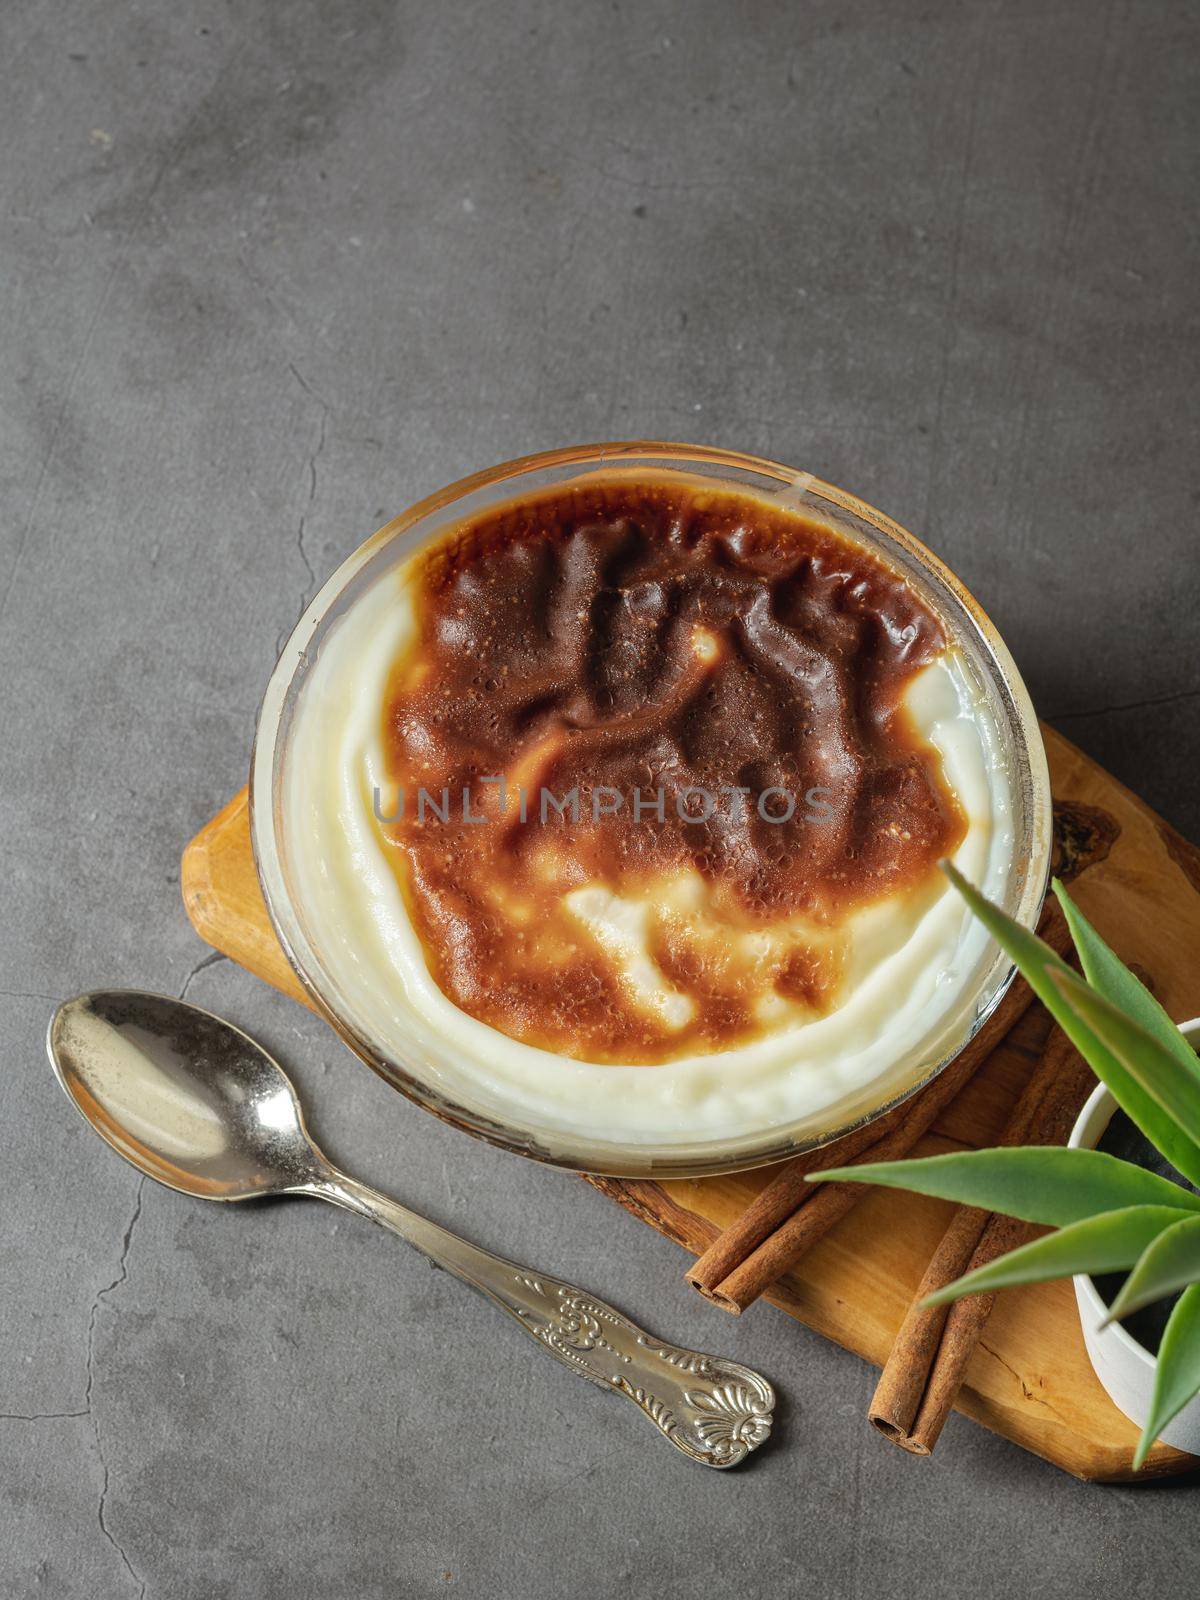 Traditional turkish dessert bakery rice pudding Turkish name Firin Sutlac in glass bowl by Sonat